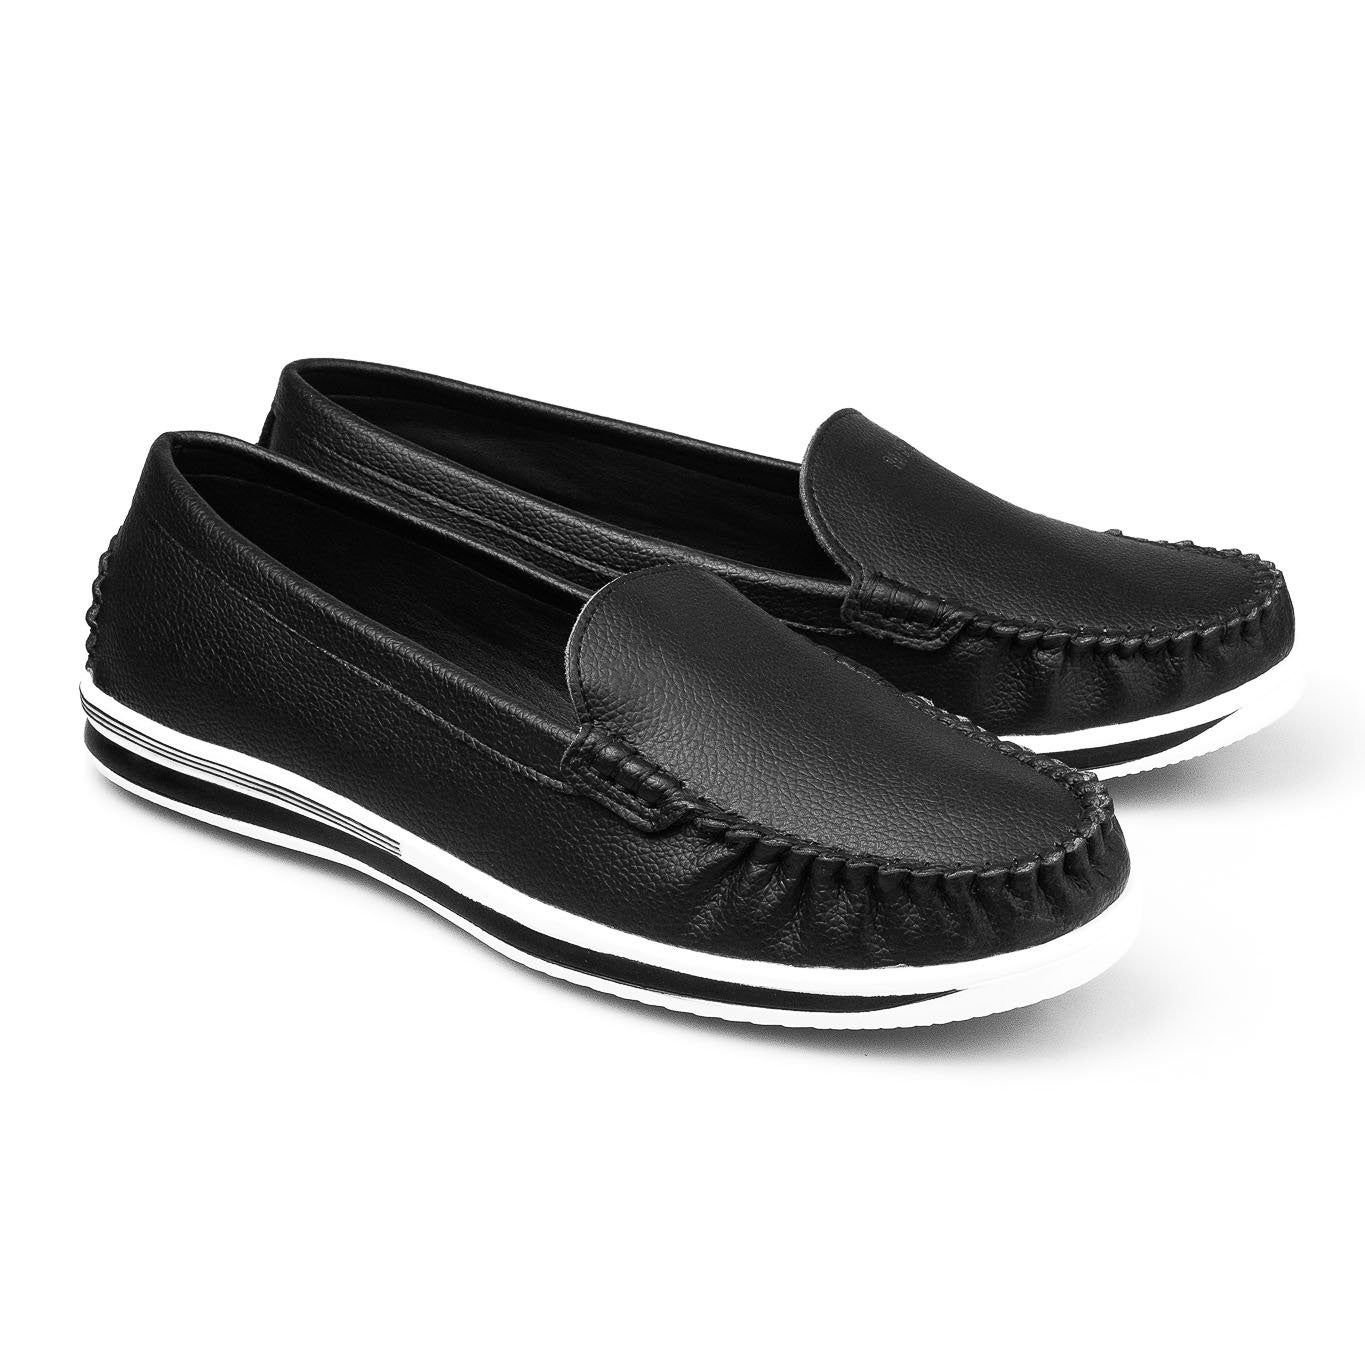 Colapa Women's Comfy Orthotic Loafers